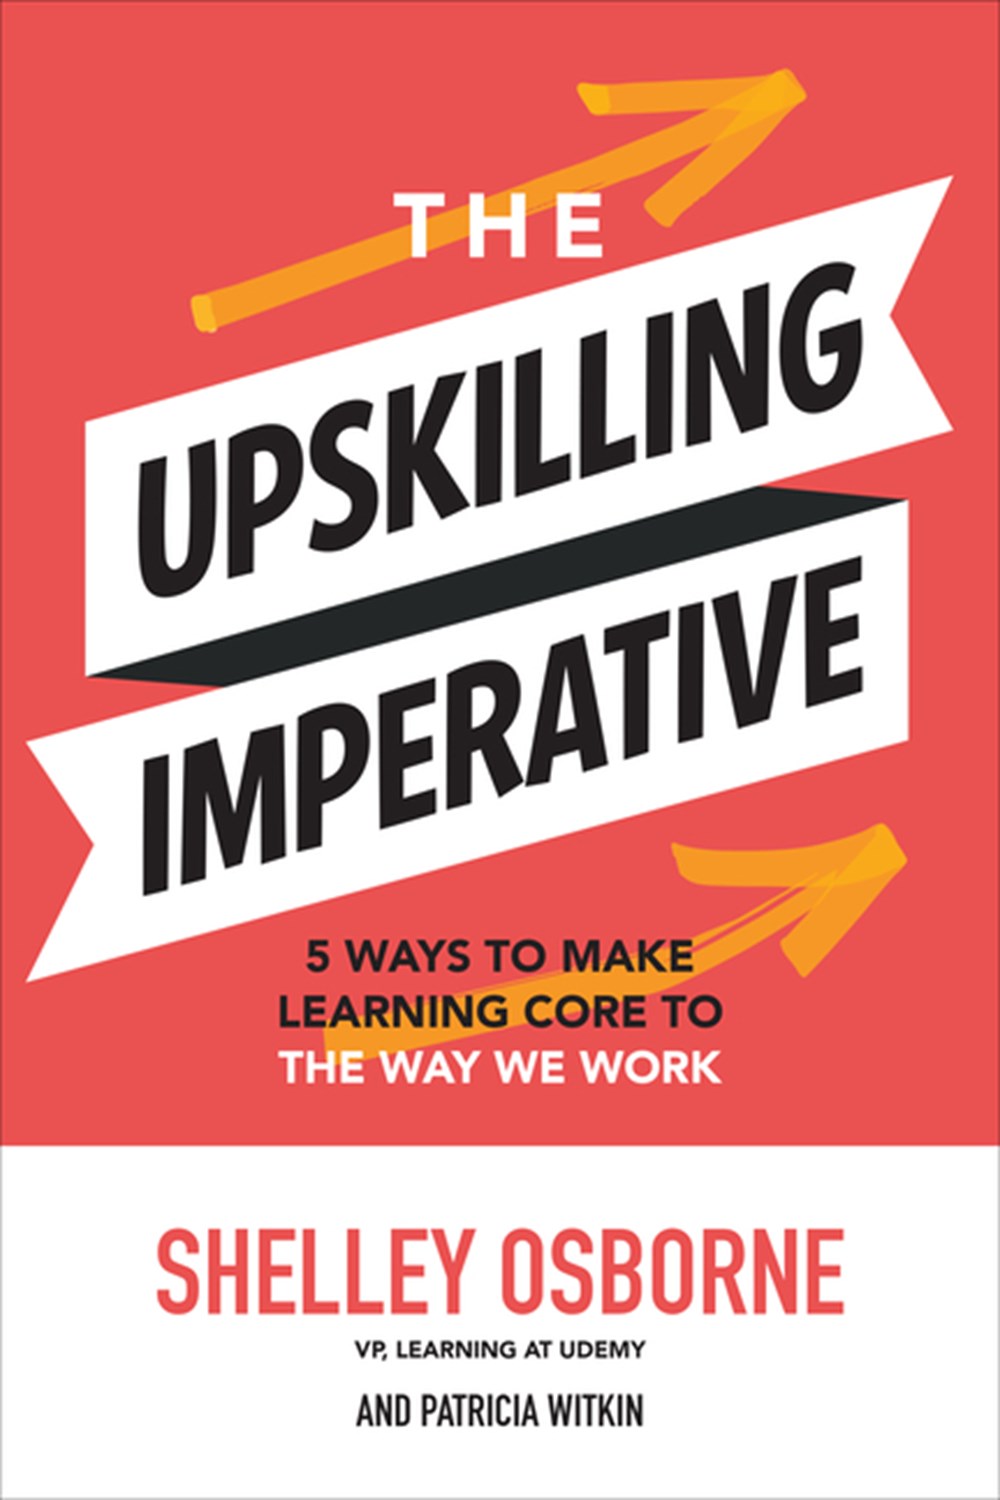 Upskilling Imperative: 5 Ways to Make Learning Core to the Way We Work